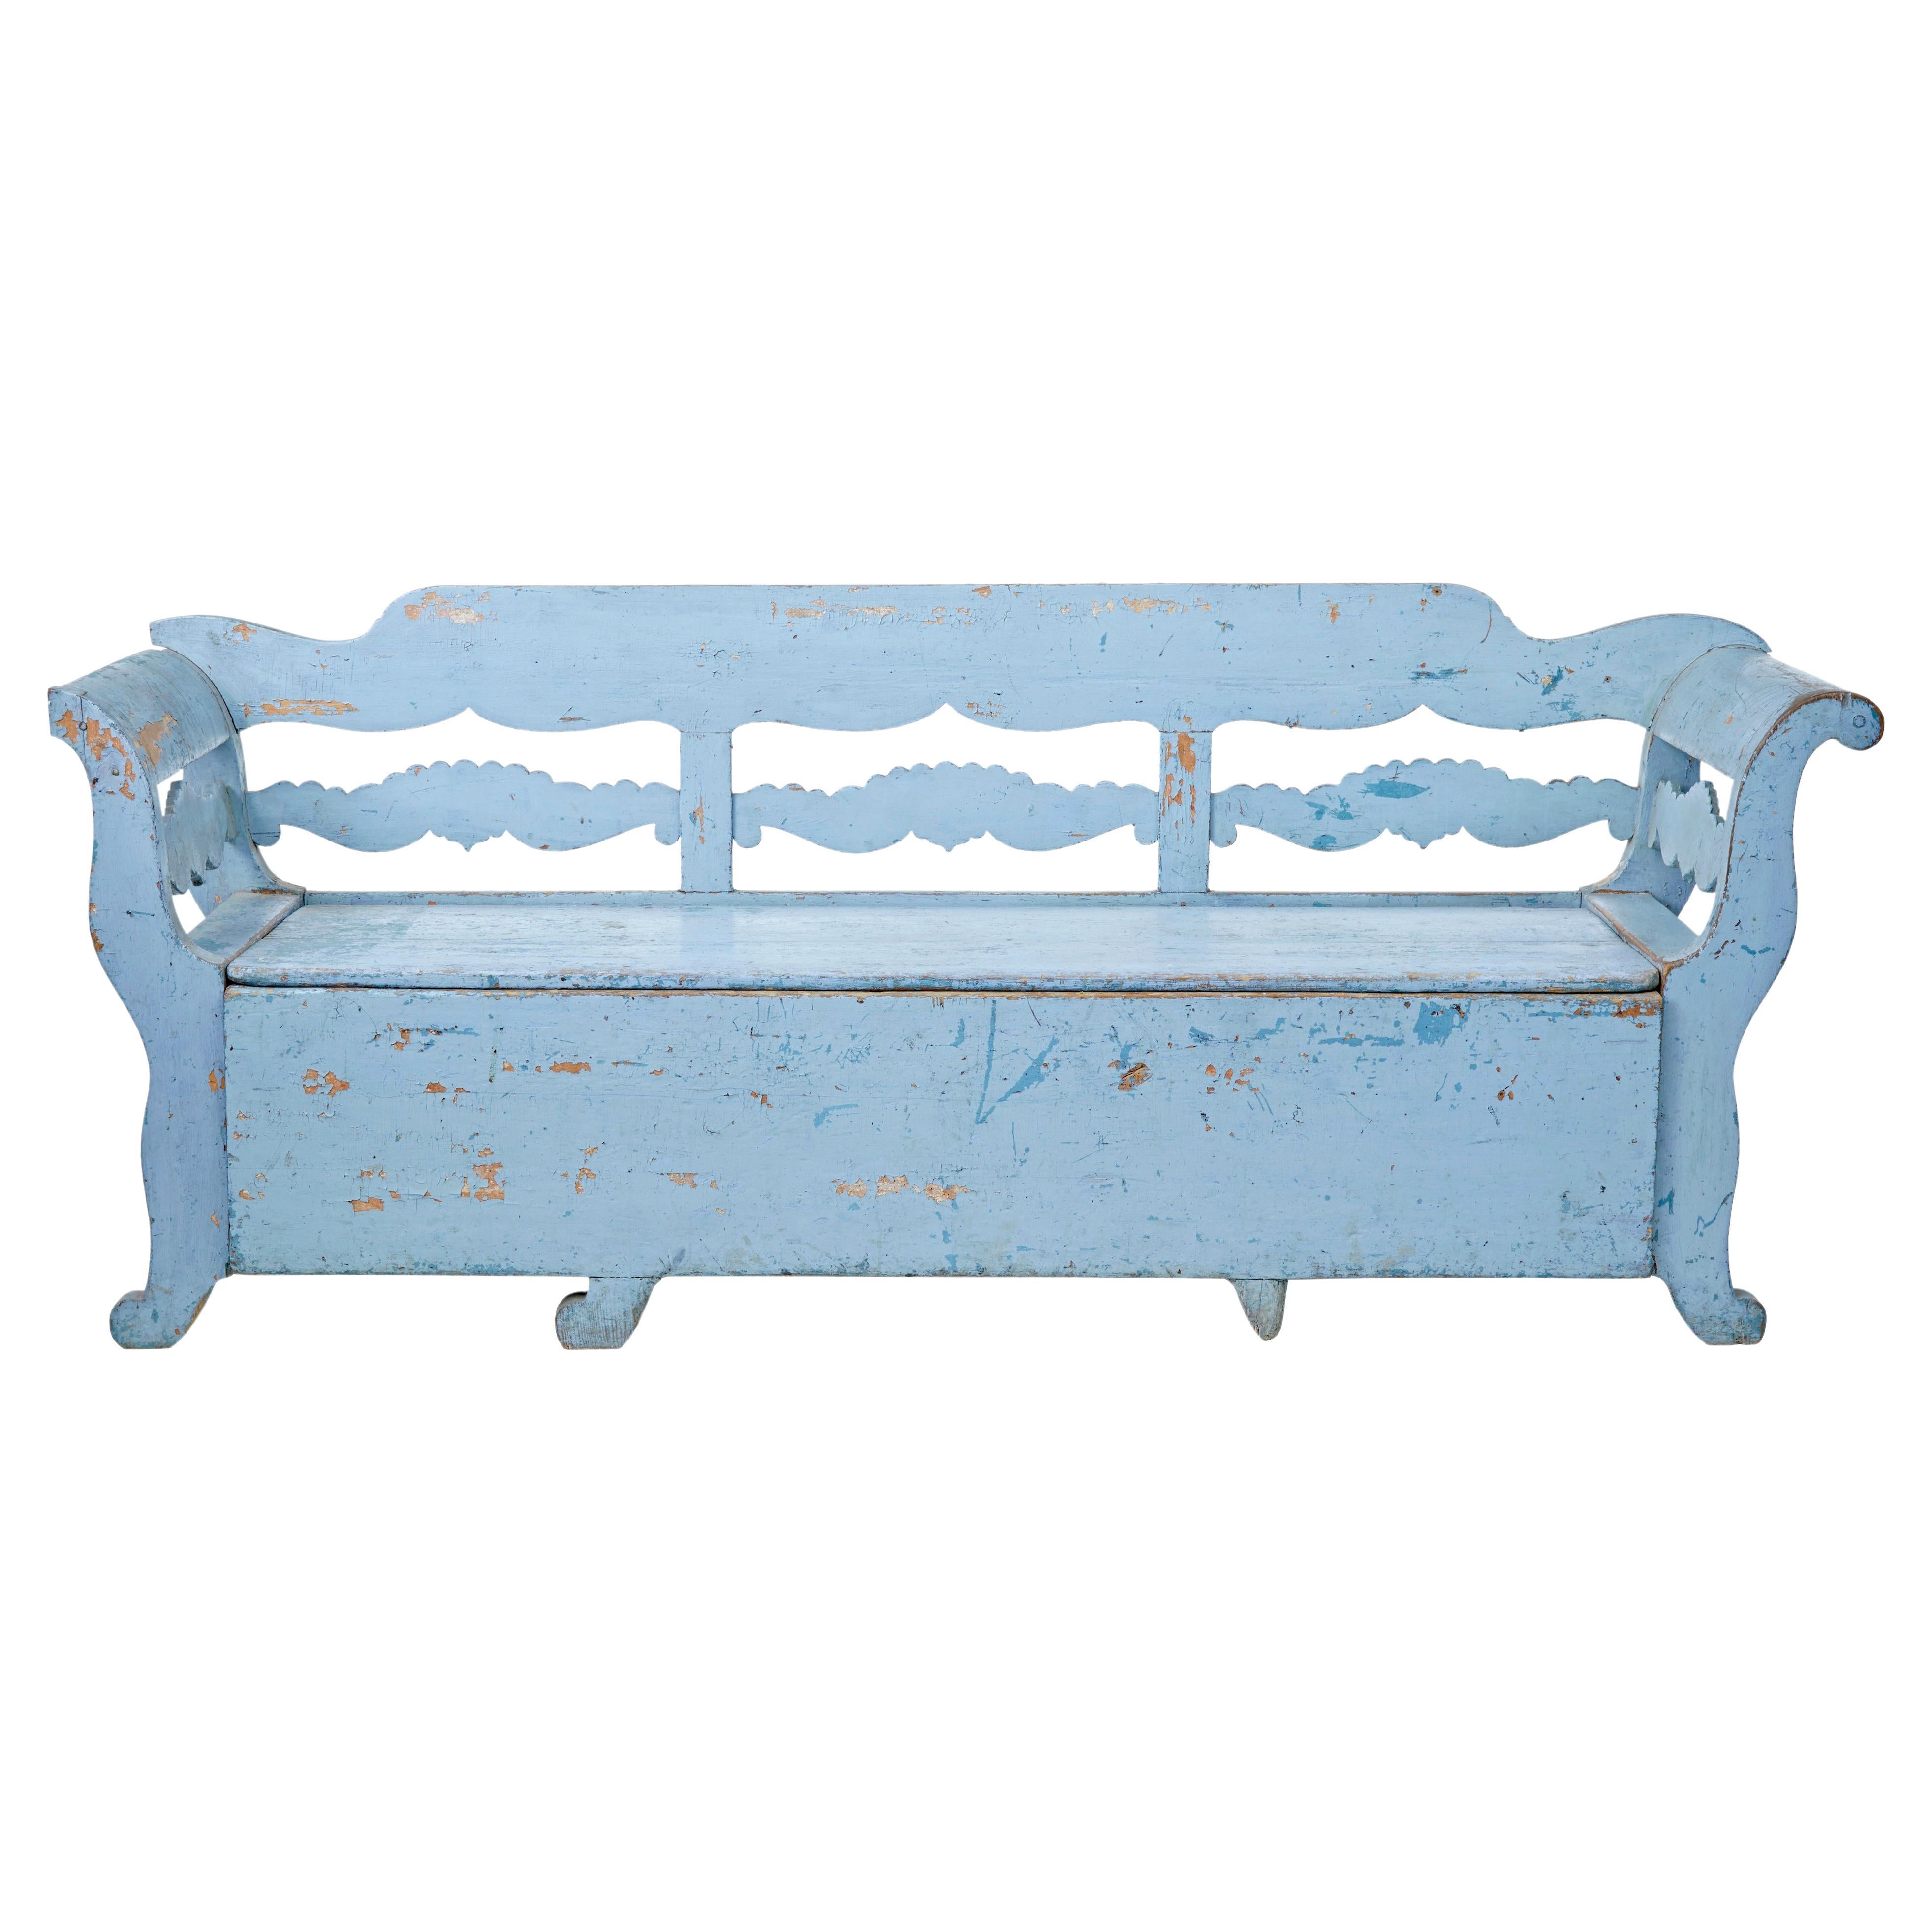 Mid-19th Century Large Painted Swedish Bench Daybed For Sale